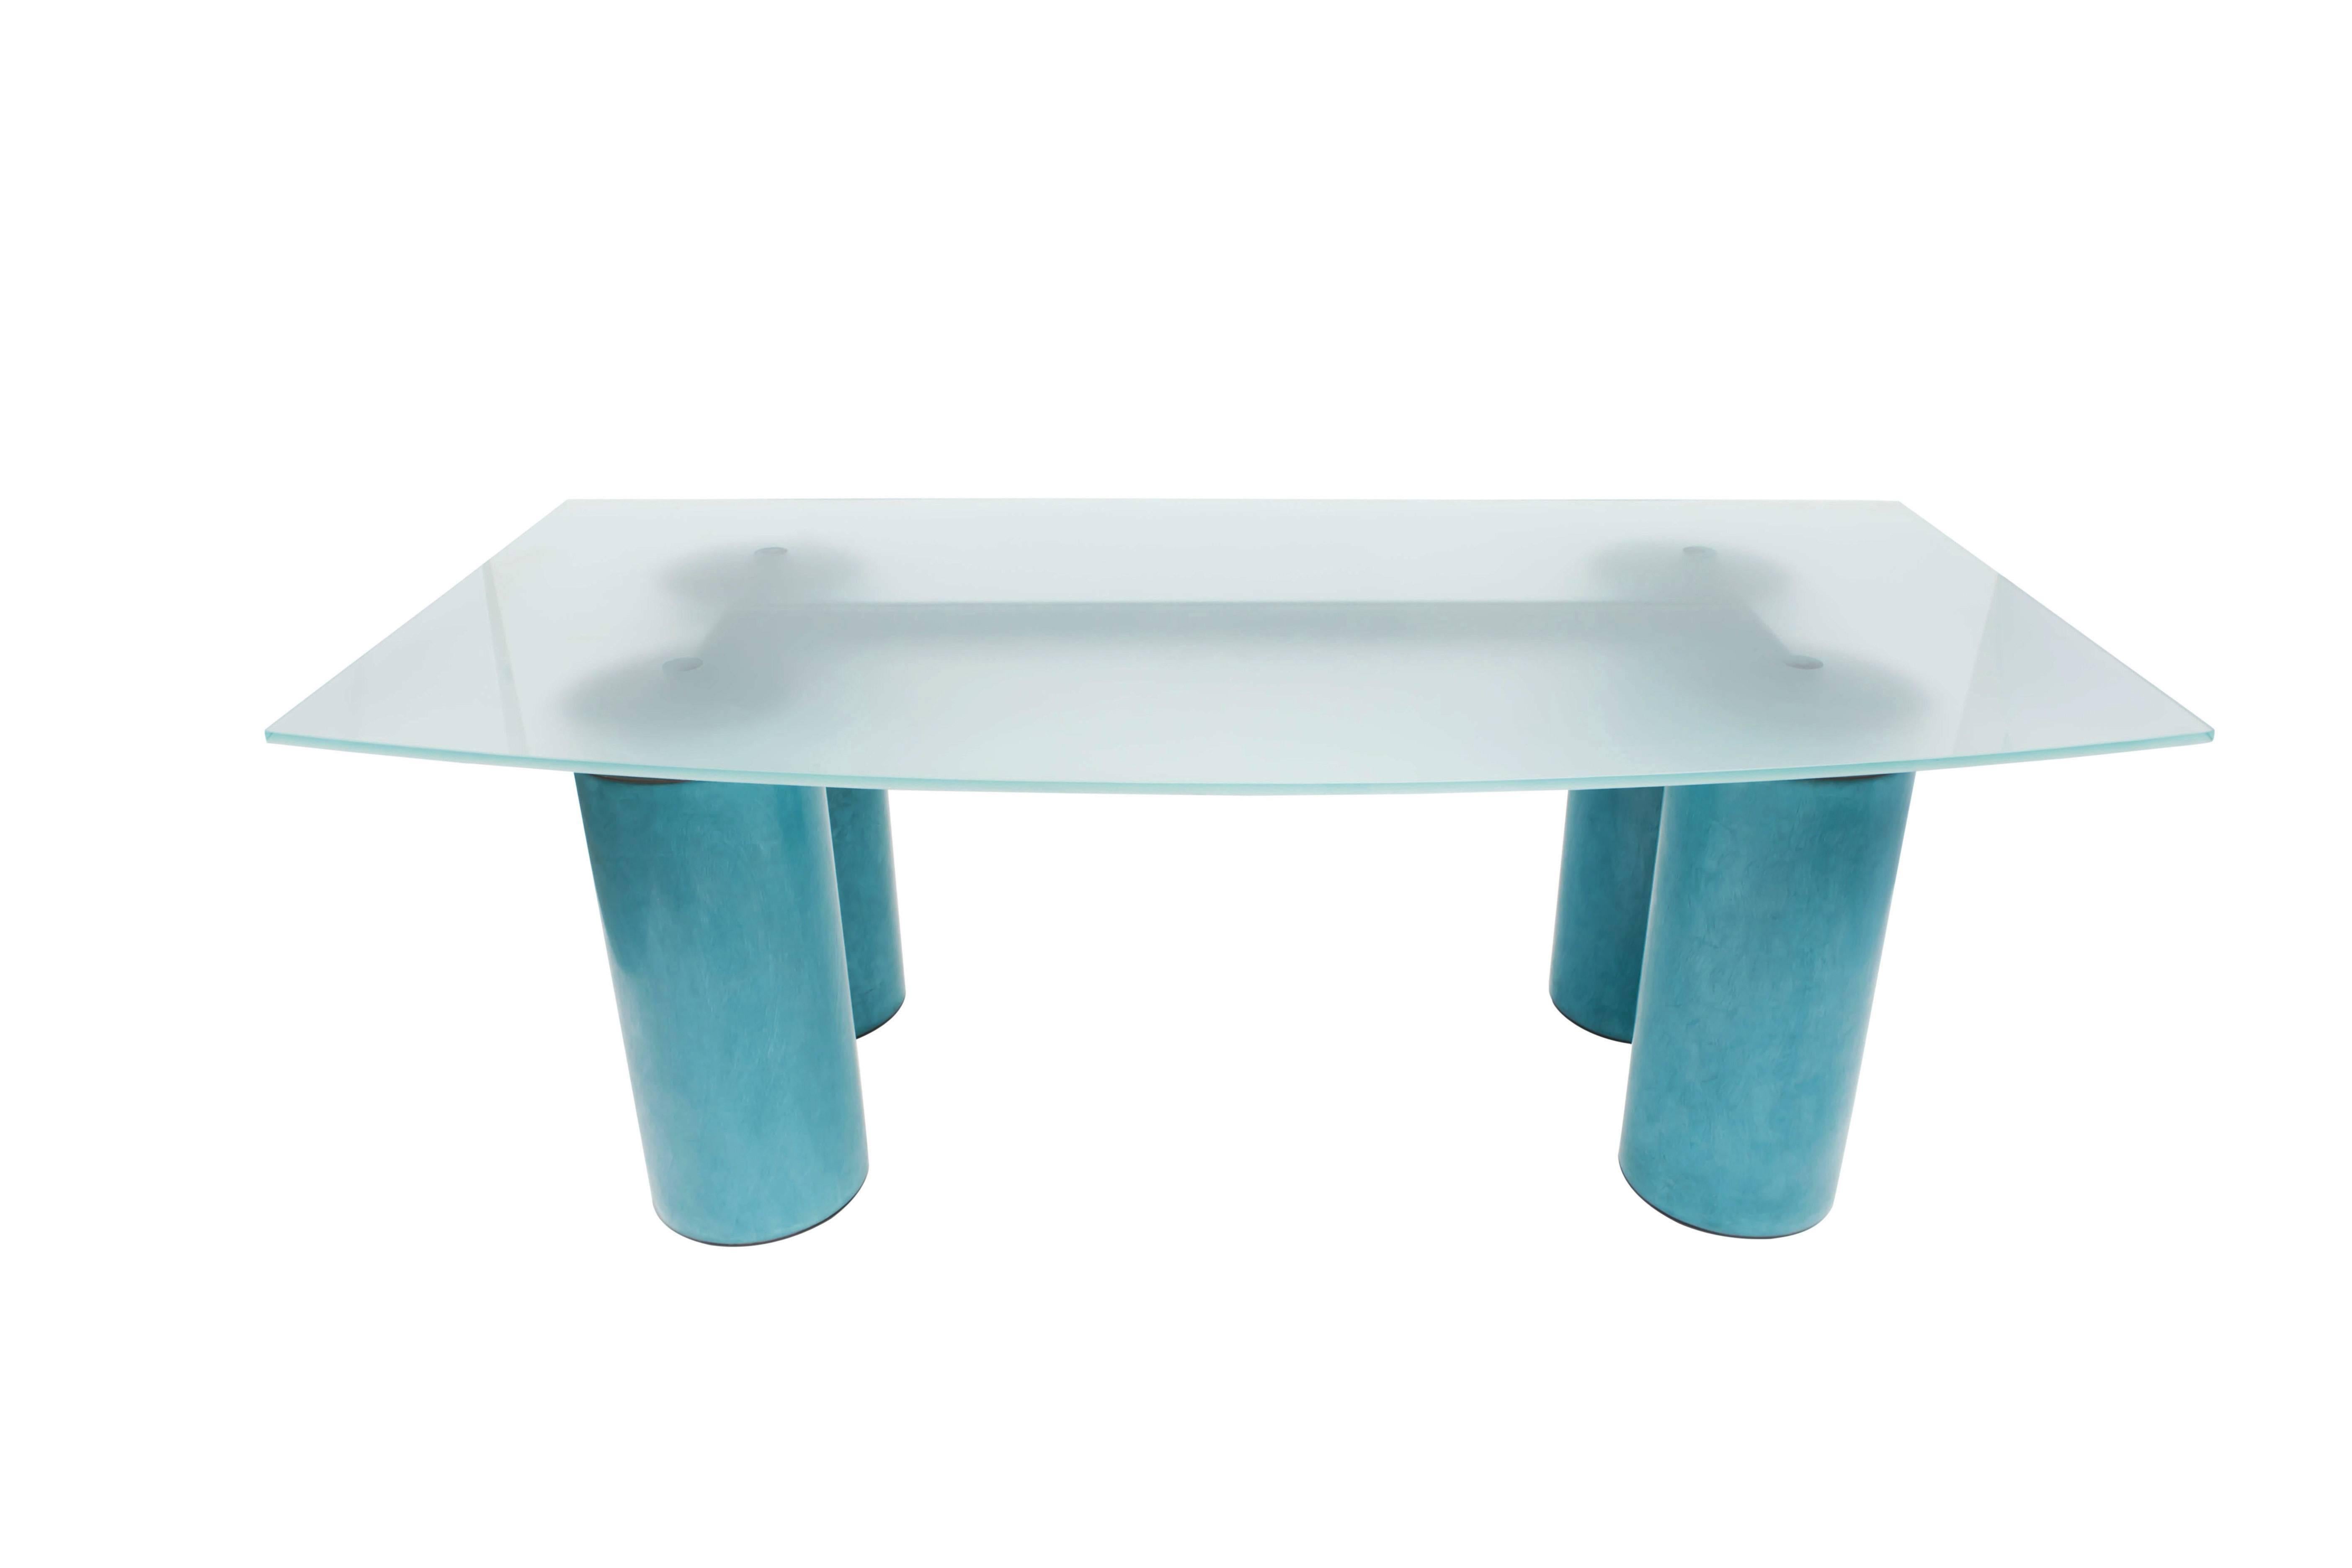 Late 20th Century Postmodern memphis style Serenissimo Table Desk by Vignelli for Acerbis